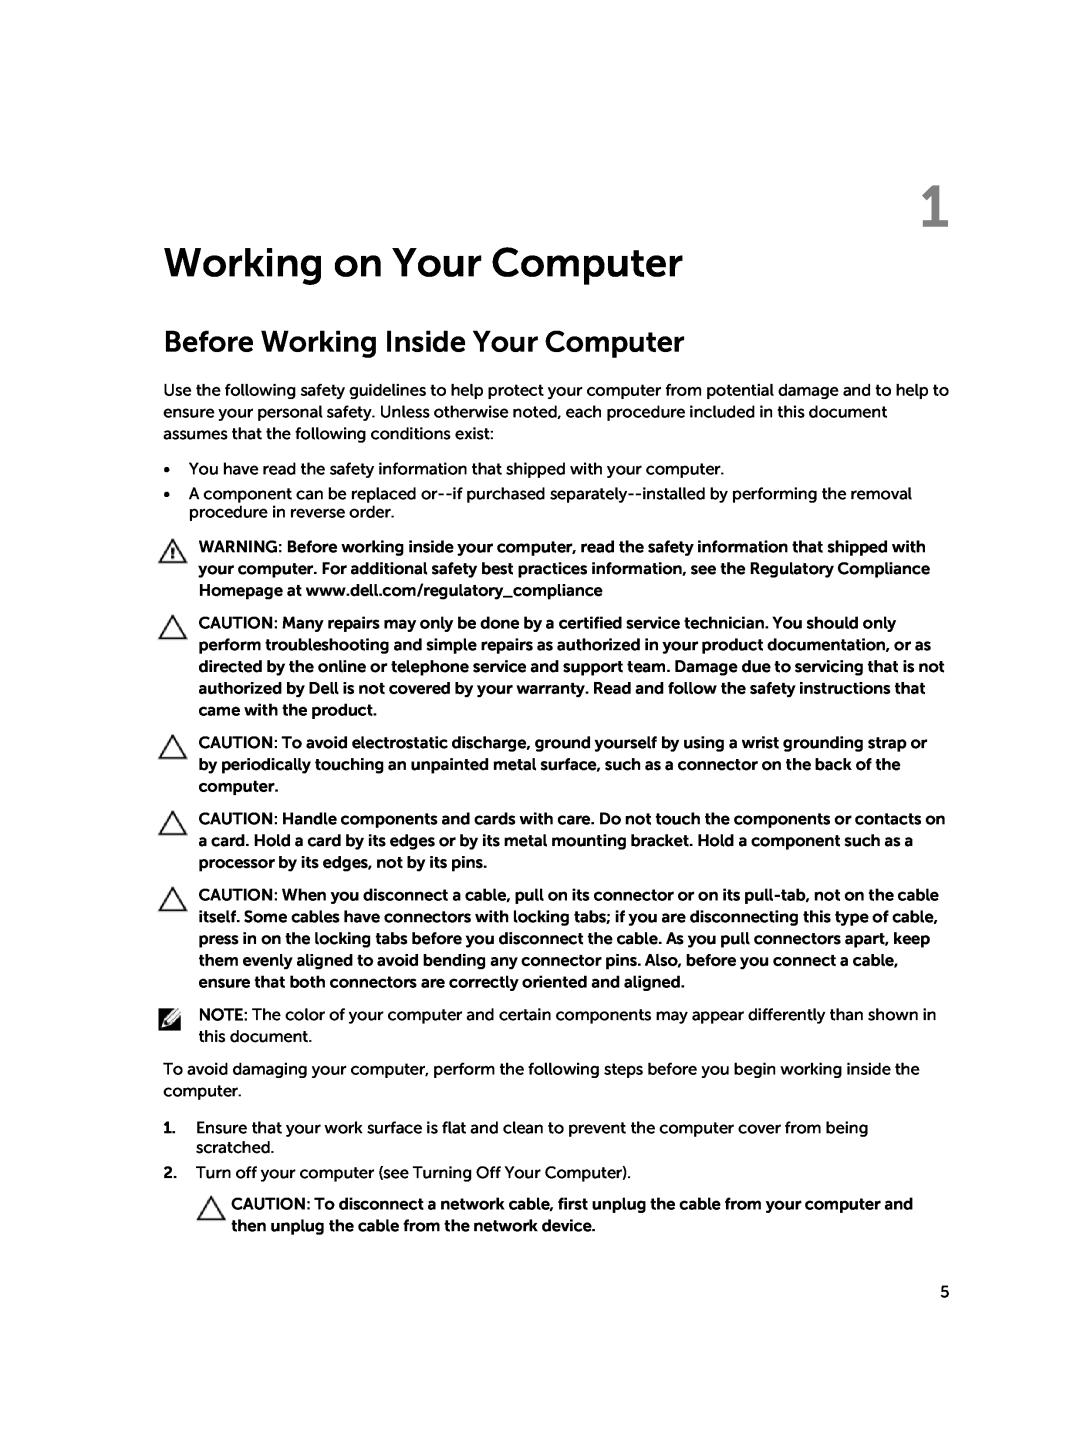 Dell D15M owner manual Working on Your Computer, Before Working Inside Your Computer 